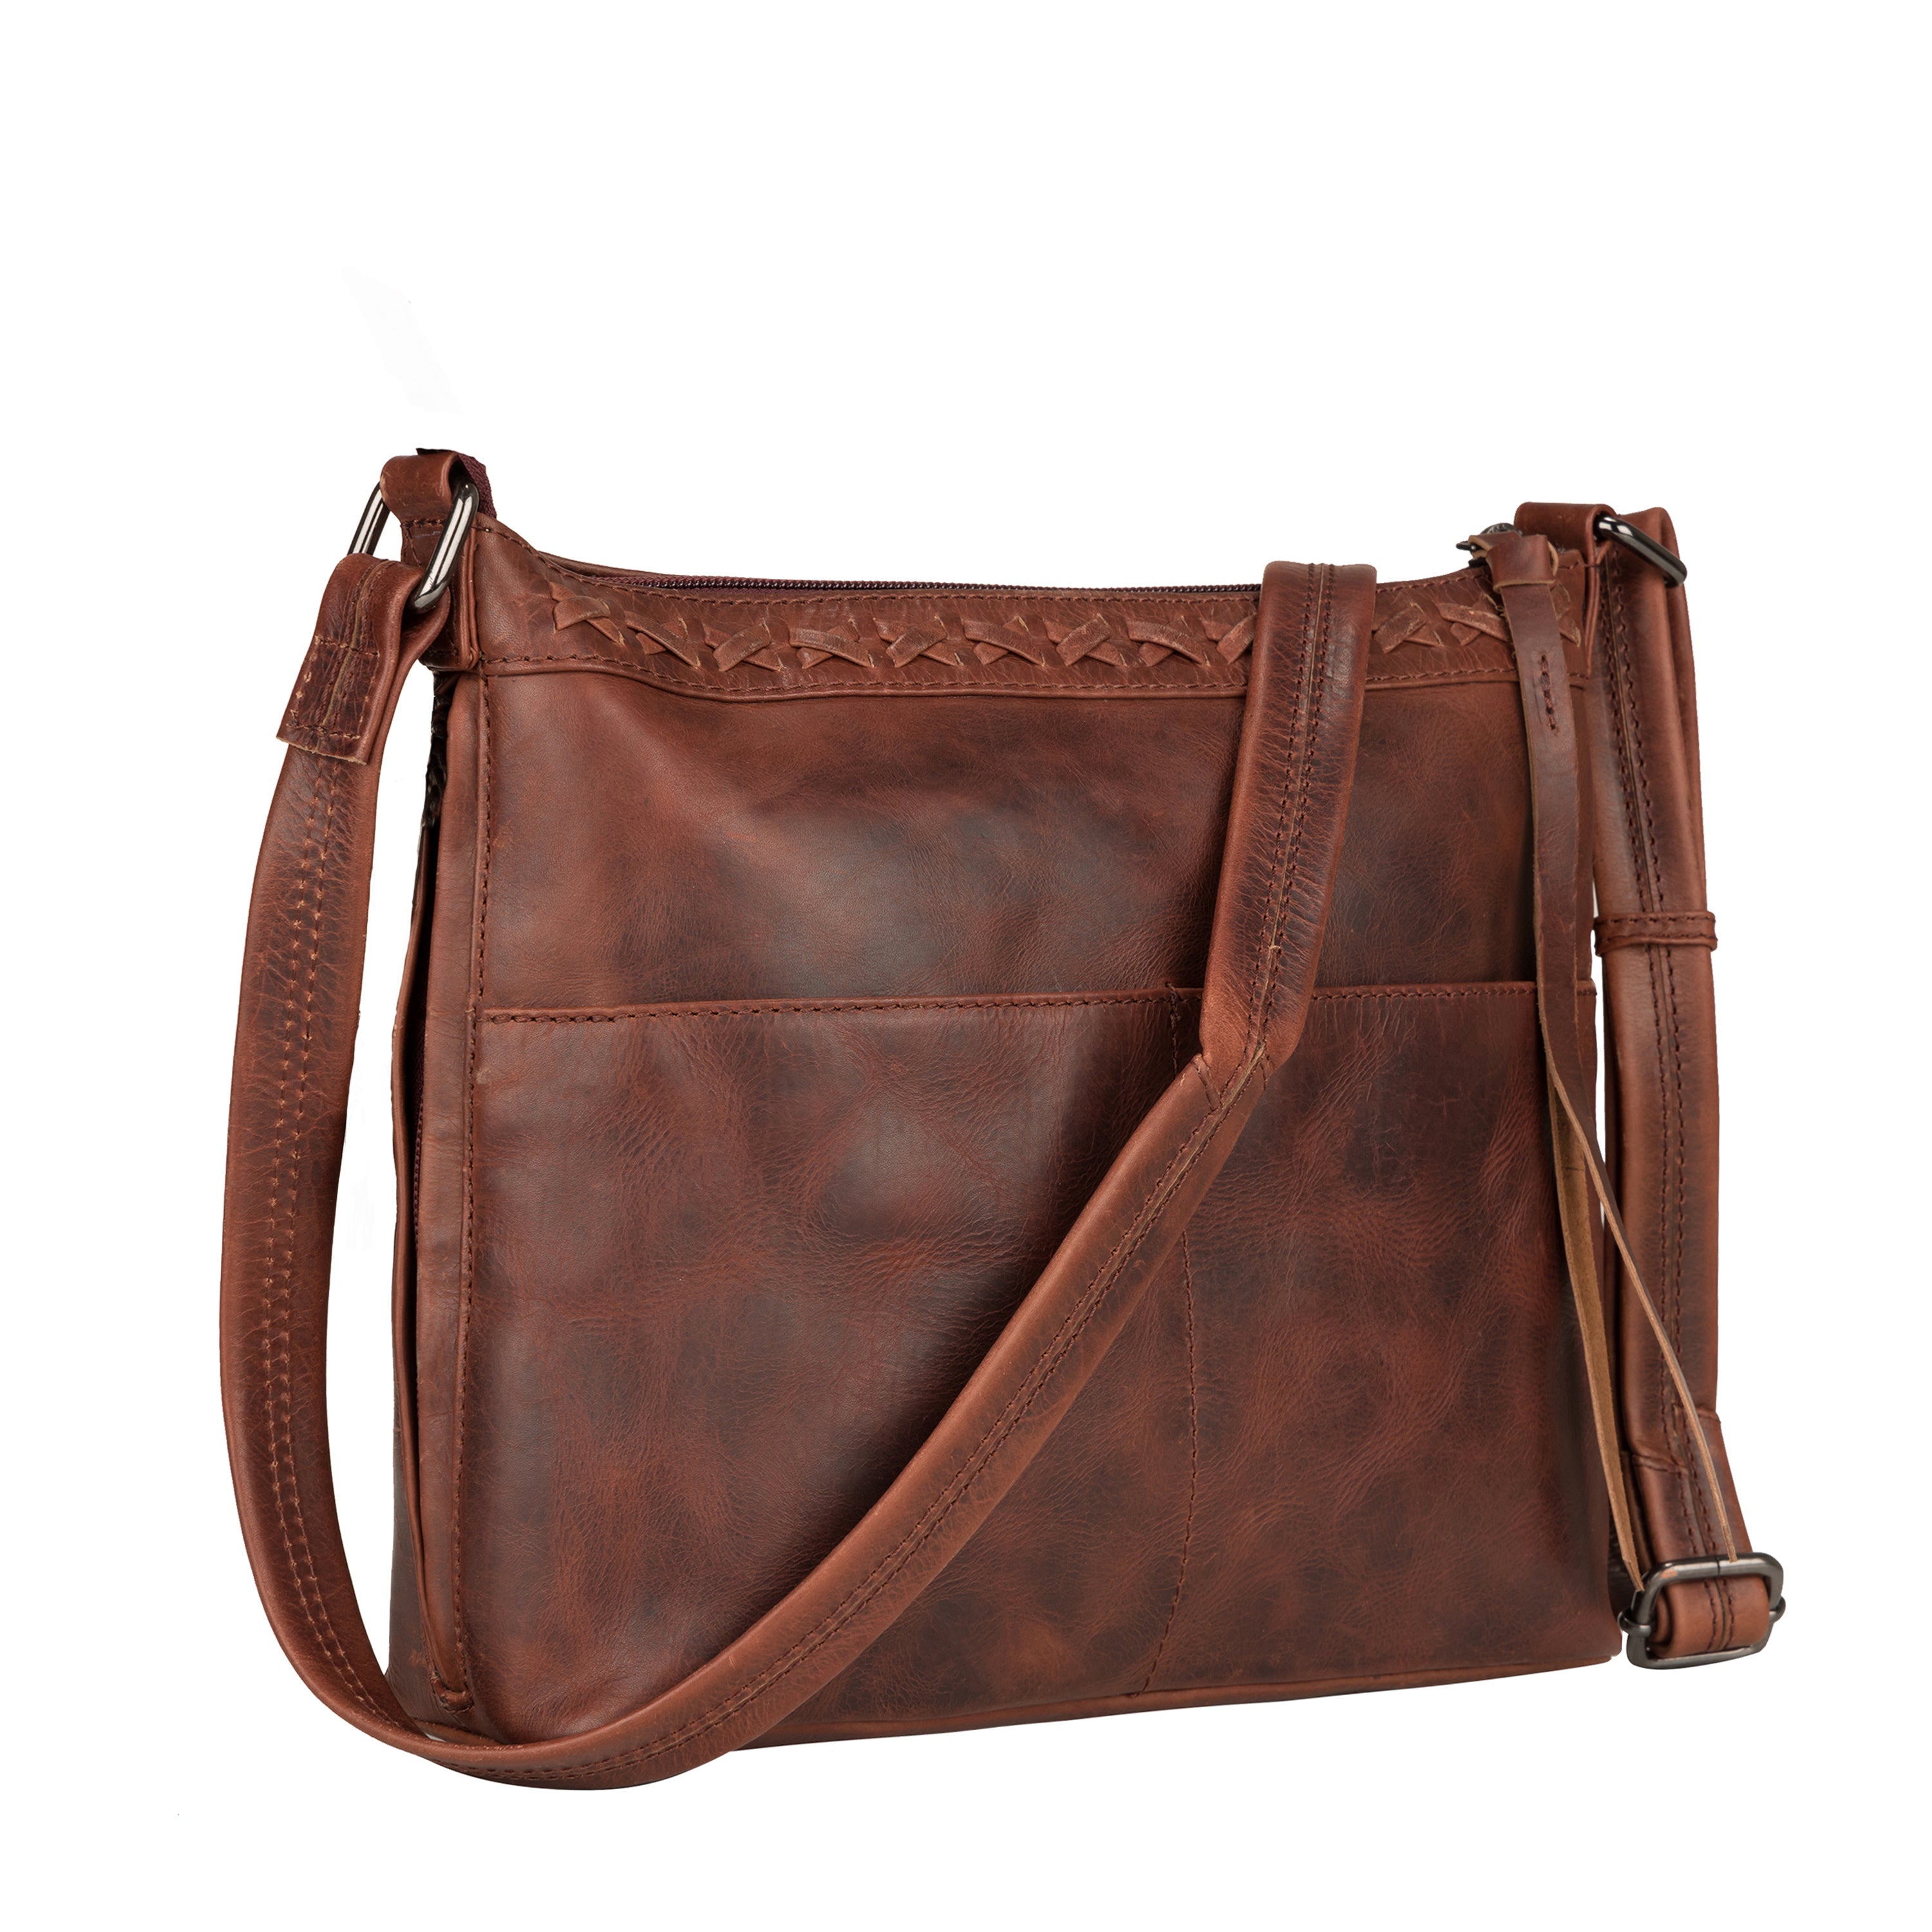 Concealed Carry Crossbody Purse for Women - Faith Leather Crossbody by Lady Conceal - Designer Leather Crossbody CCW Bag - Locking Conceal and Carry Purse with Universal Holster for Handguns - Crossbody Gun and Pistol Bag - concealed carry crossbody Faith leather gun purse with locking zipper